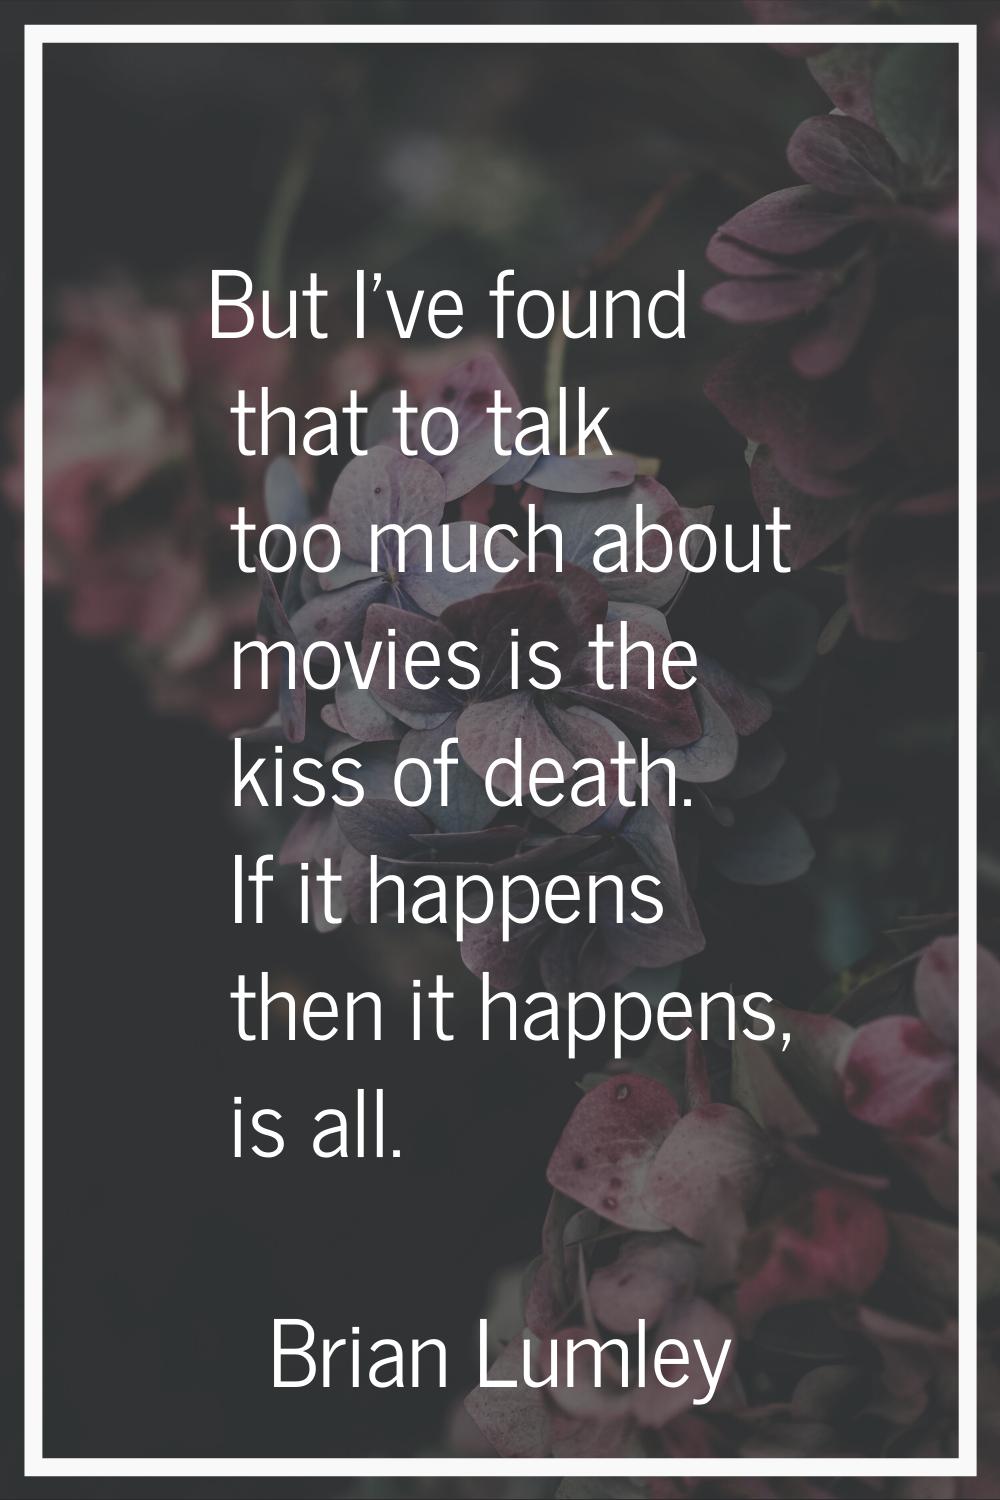 But I've found that to talk too much about movies is the kiss of death. If it happens then it happe